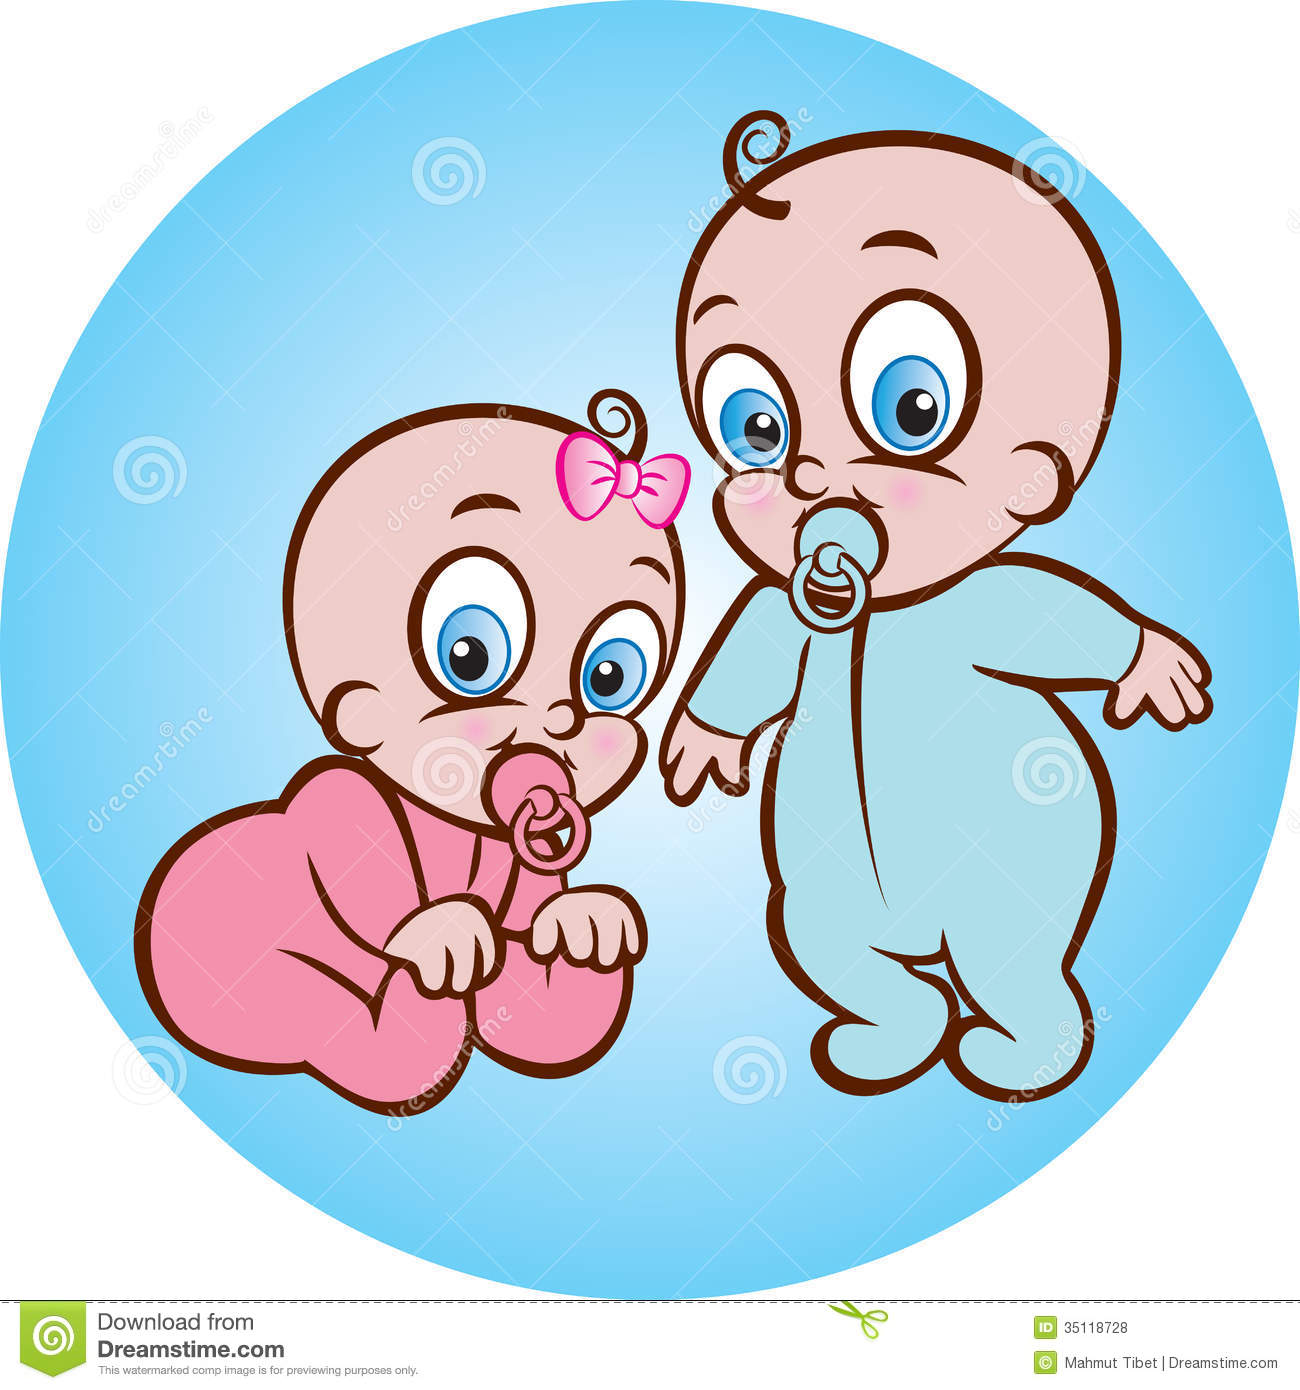 Happy Baby Boy And Girl Royalty Free Stock Photos   Image  35118728